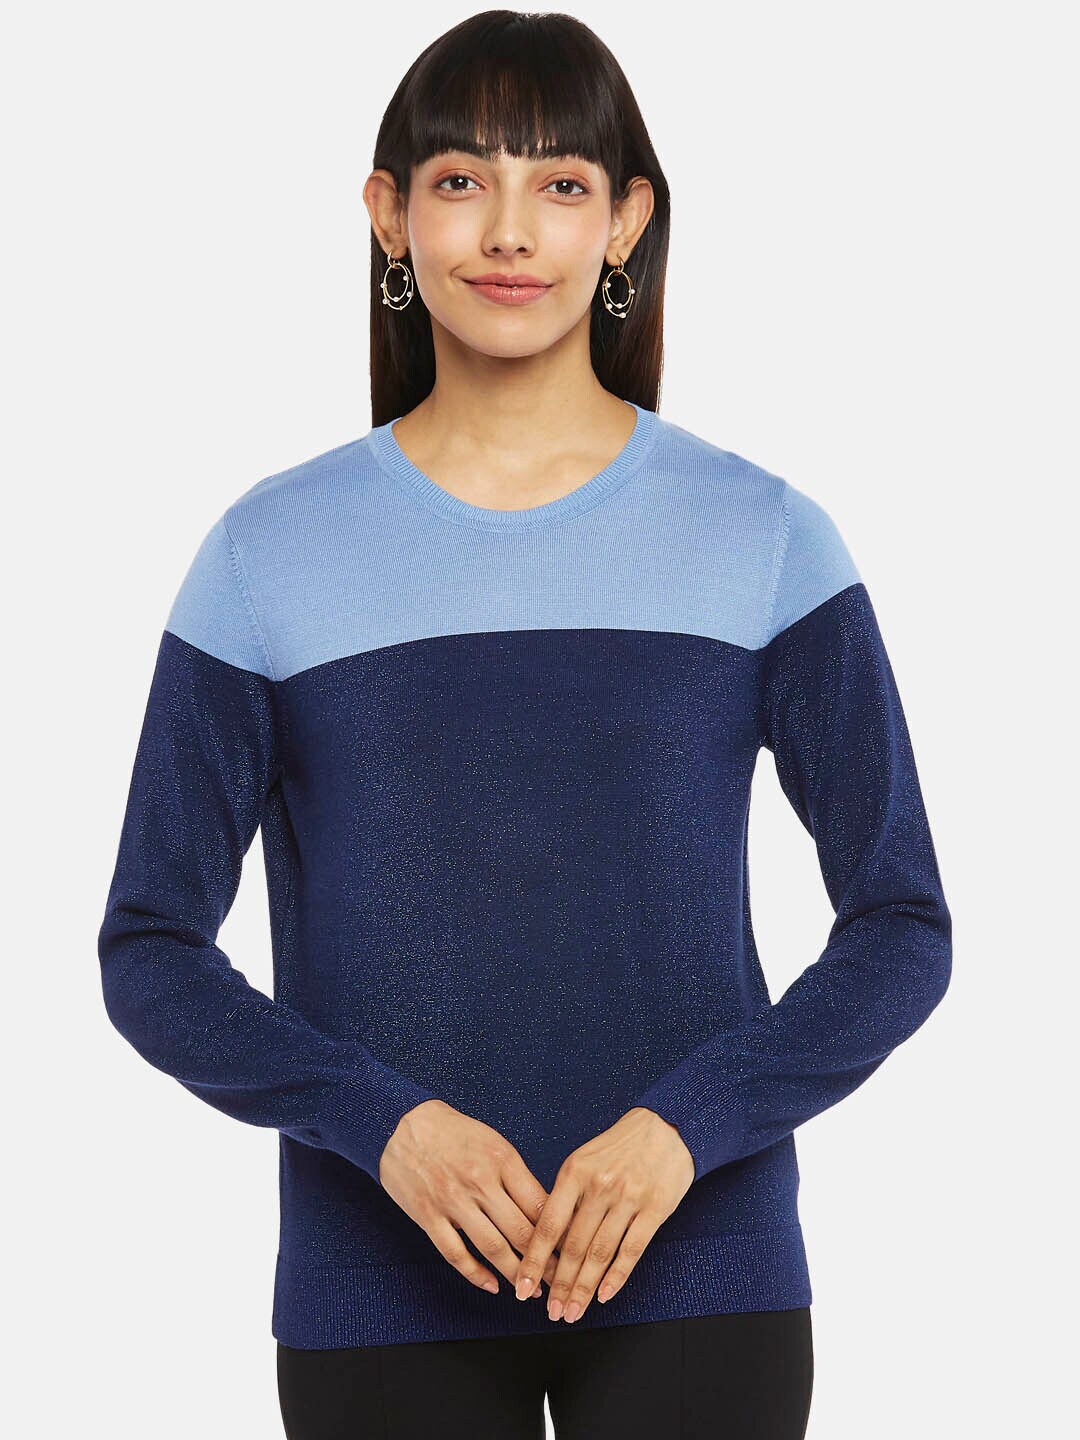 Annabelle by Pantaloons Women Navy Blue & Blue Colourblocked Top Price in India